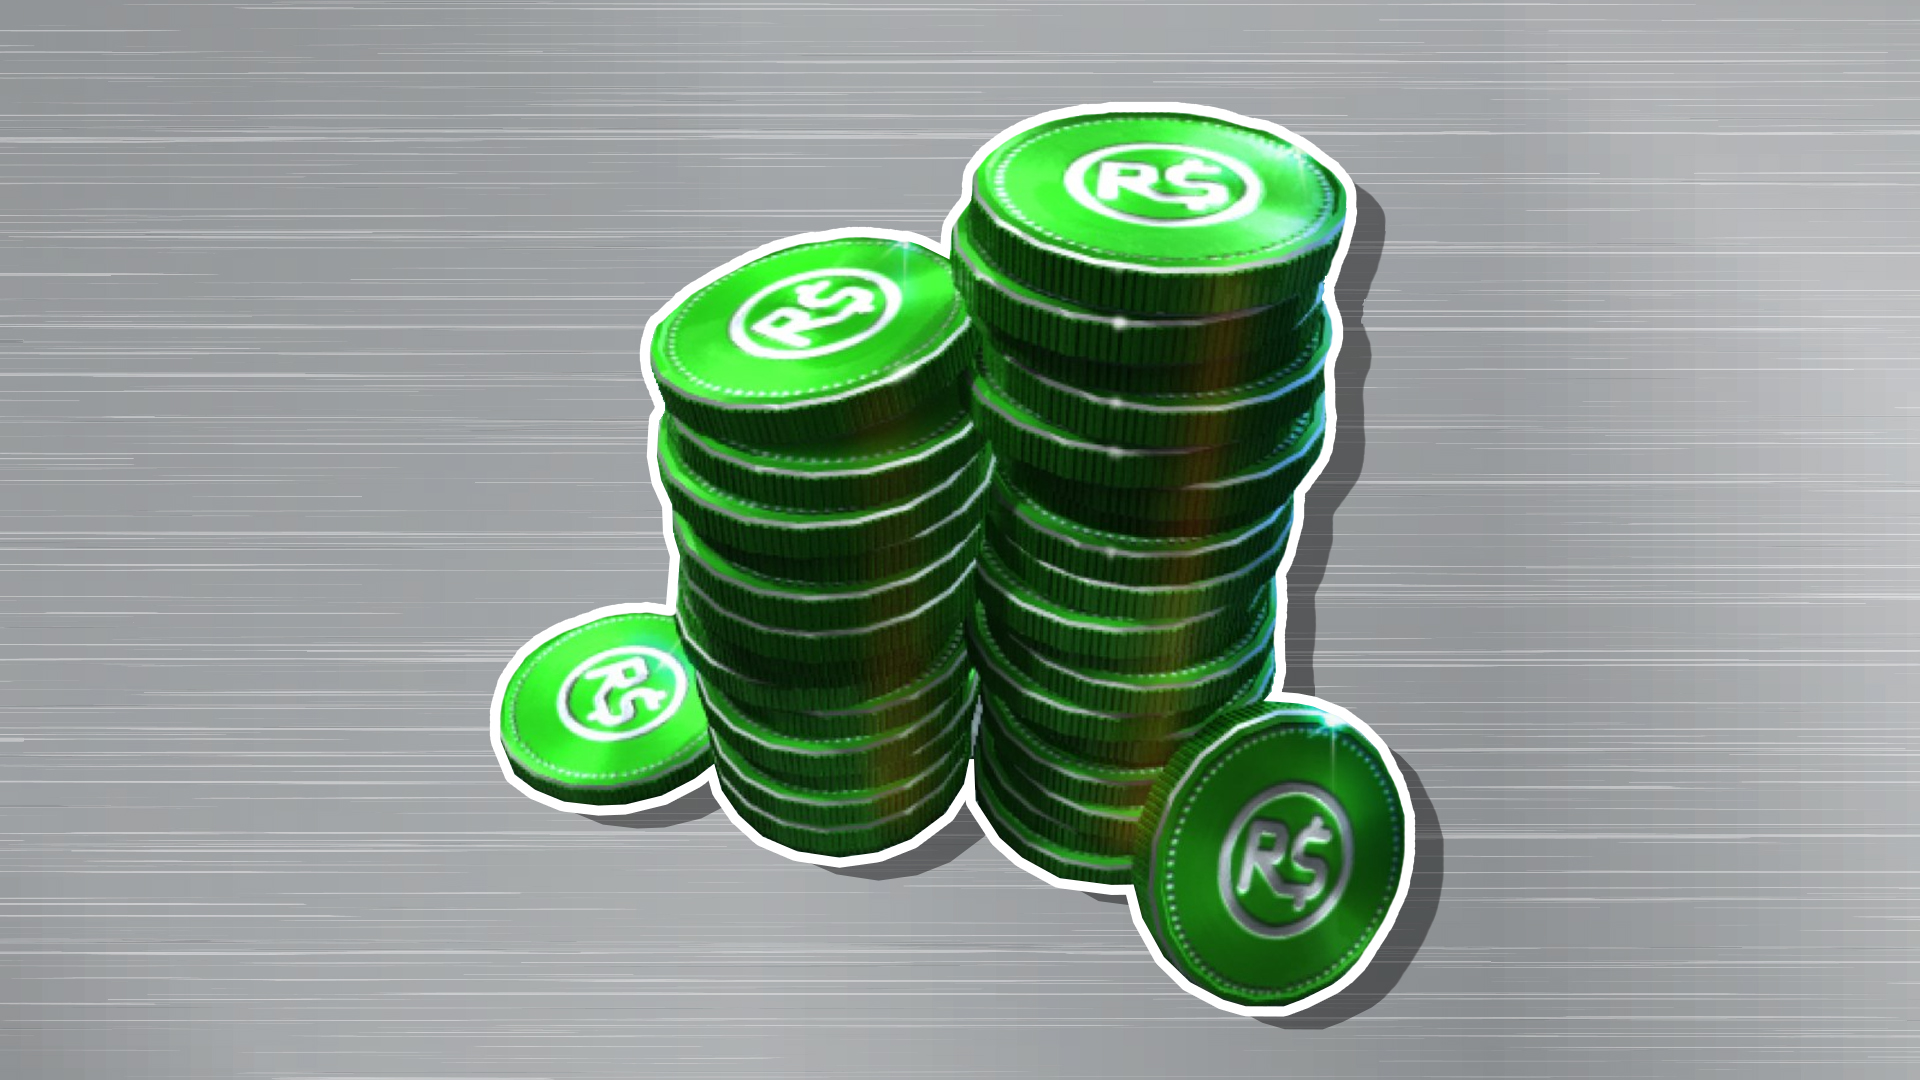 Robux coins